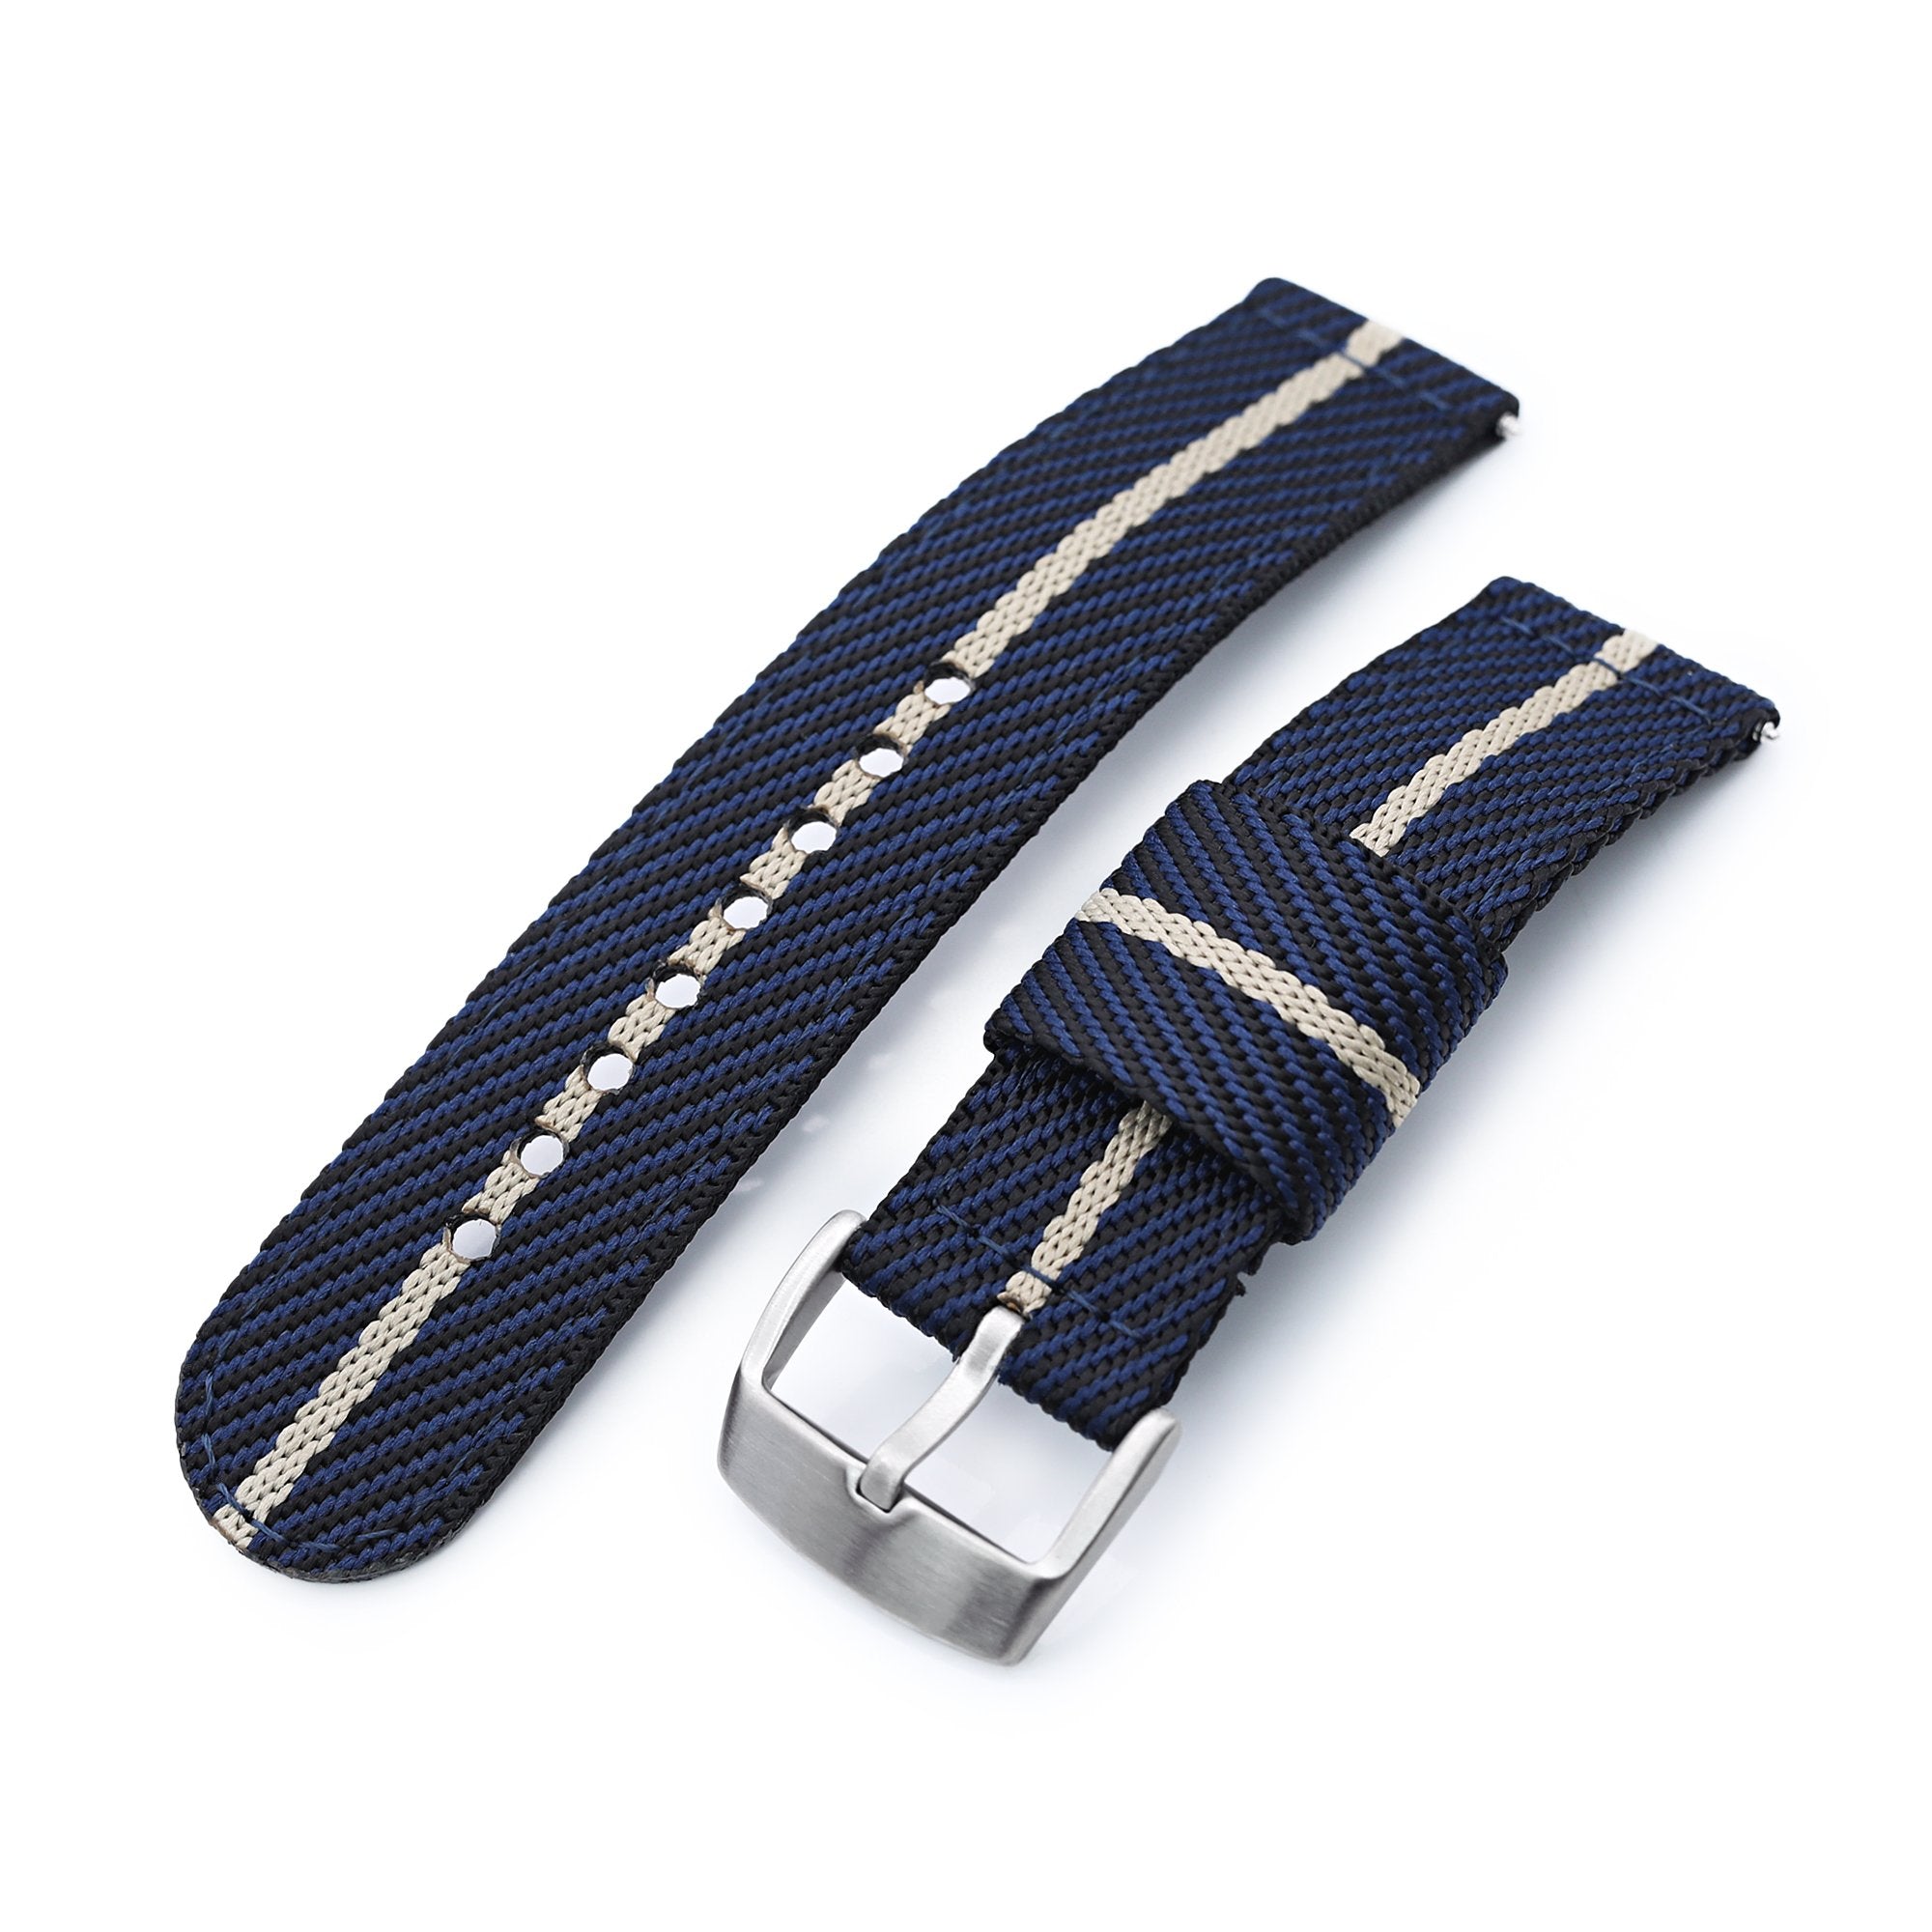 22mm 2-pcs Nylon Watch Band, Quick Release, Blue & Khaki, Brushed Buckle Strapcode Watch Bands